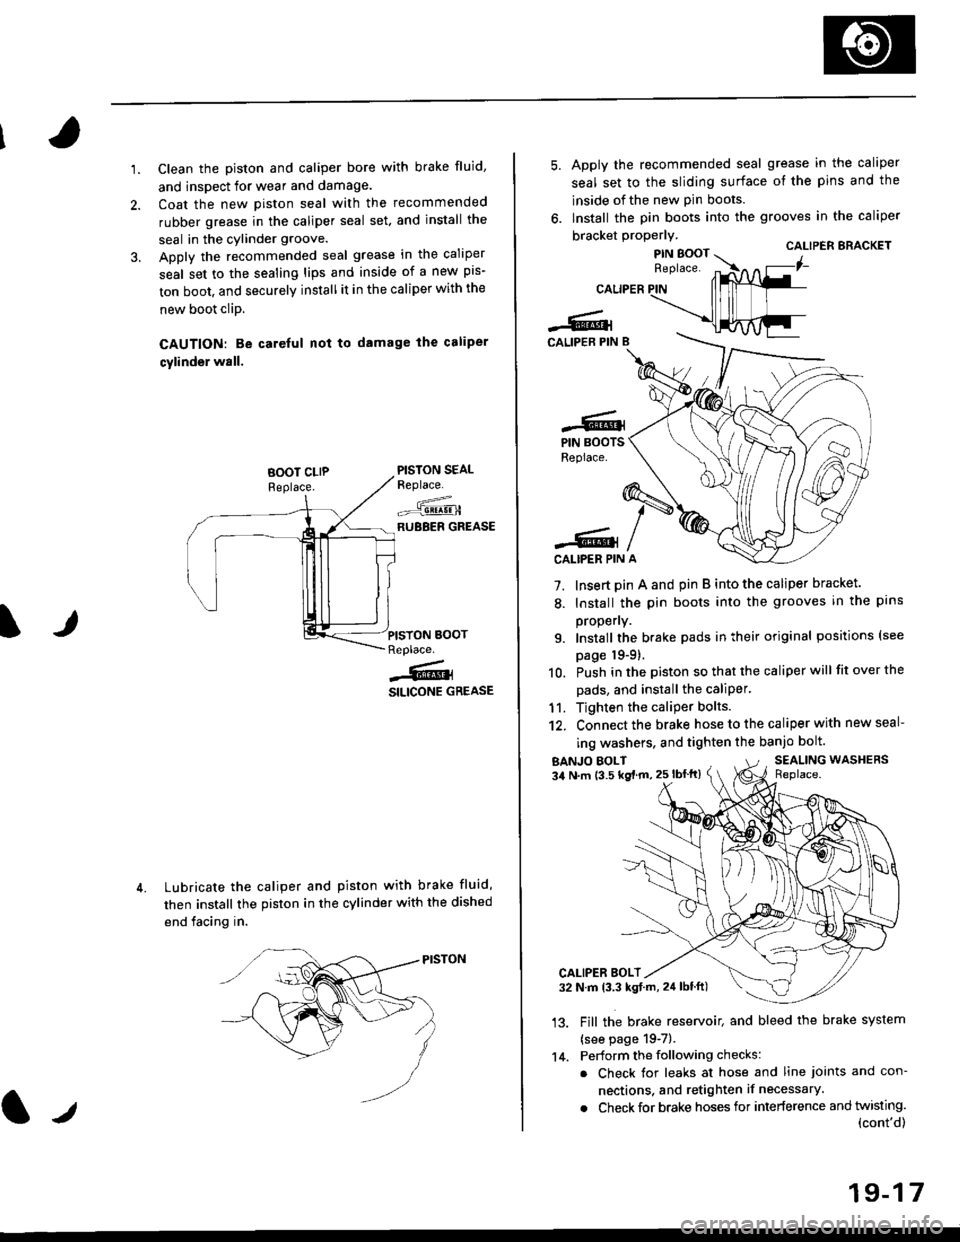 HONDA CIVIC 1997 6.G Workshop Manual 1.Clean the piston and caliper bore with brake fluid,
and inspect for wear and damage.
Coat the new piston seal with the recommended
rubber grease in the caliper seal set. and install the
seal in the